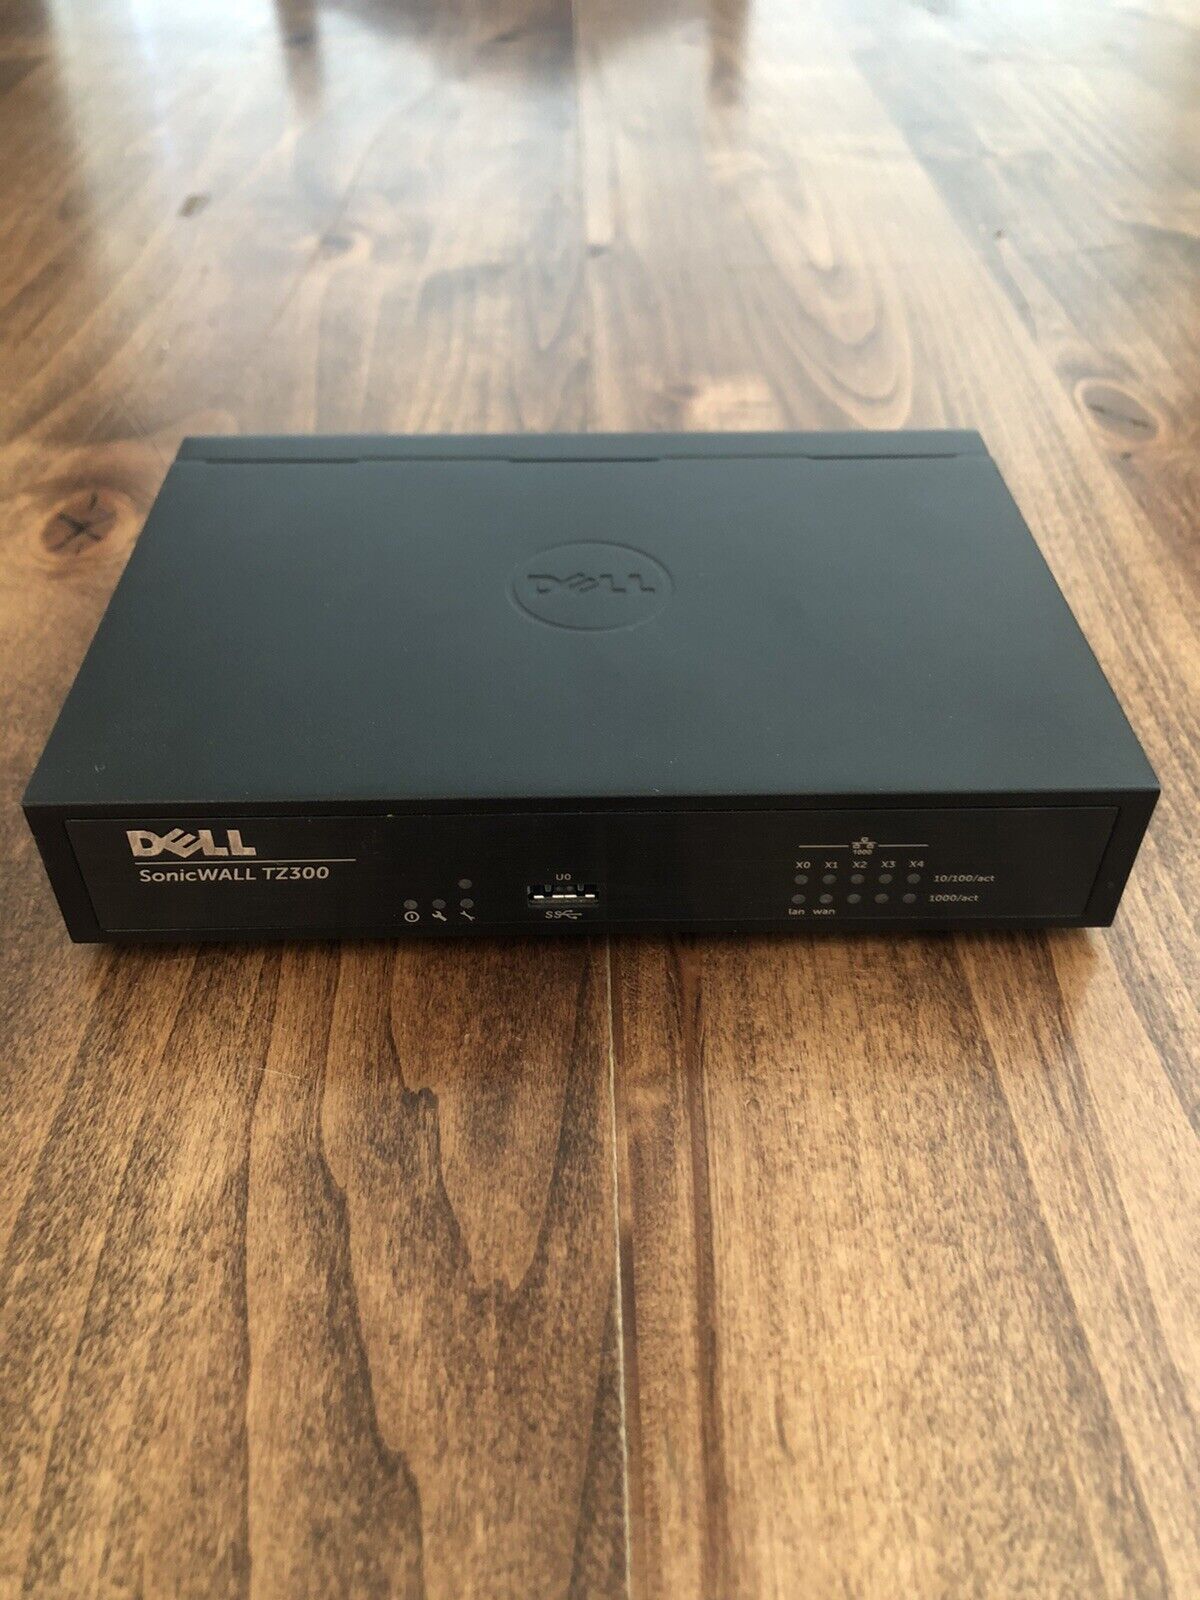 Dell SonicWALL TZ300 Security Firewall Appliance